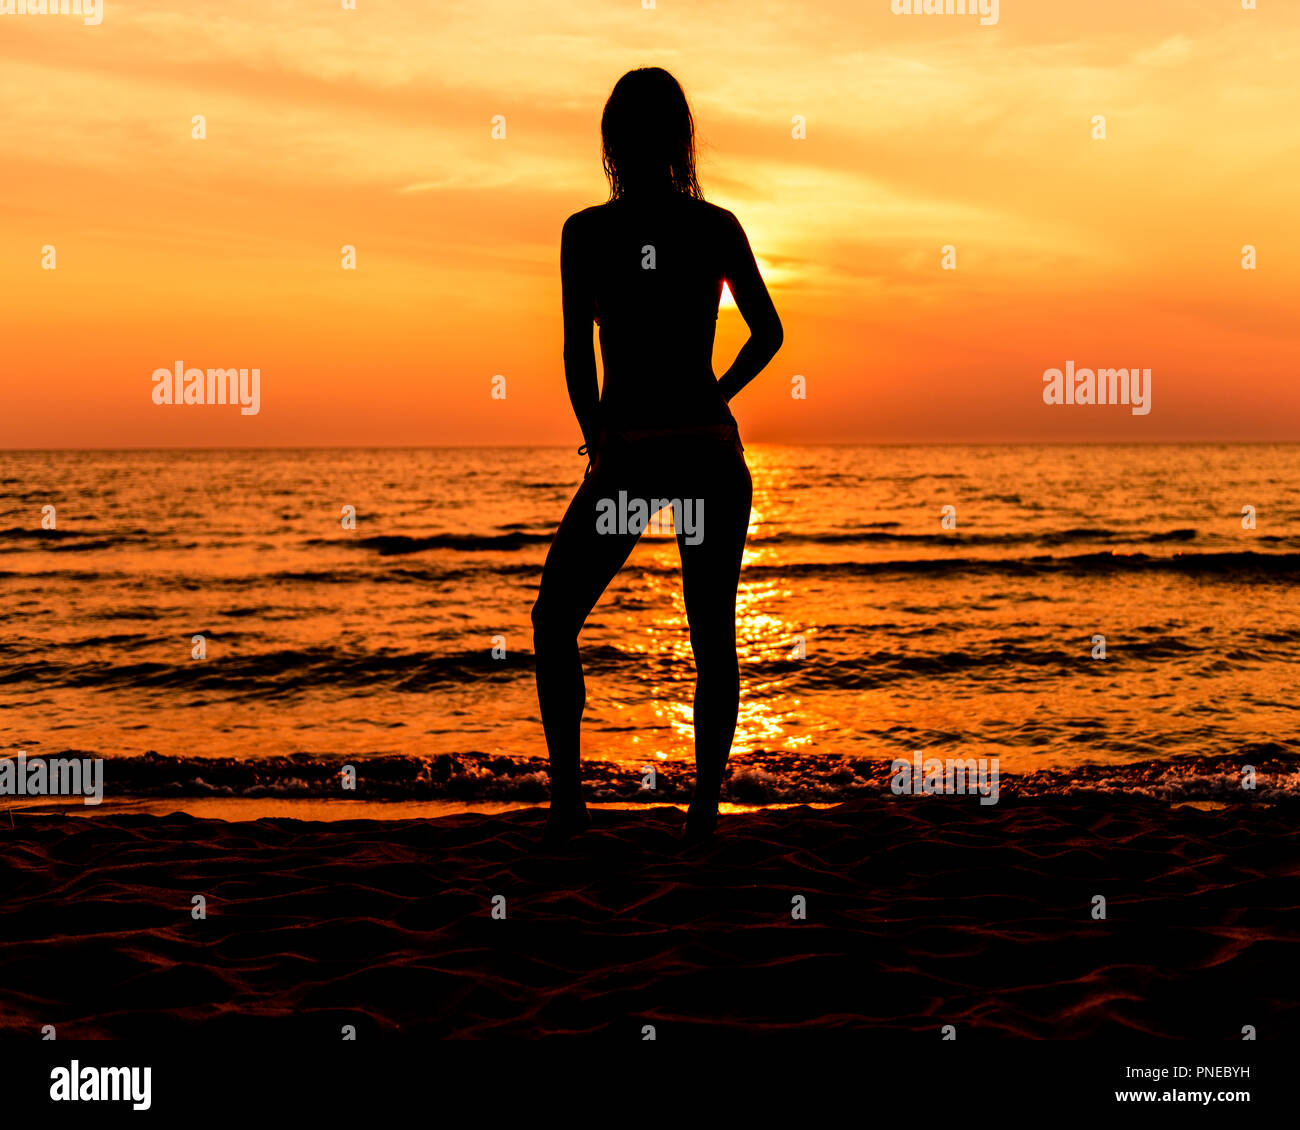 Teen Girl In A Bathing Suit With Long Hair At The Beach In Silhouette During Sunset In A Casual Pose Stock Photo